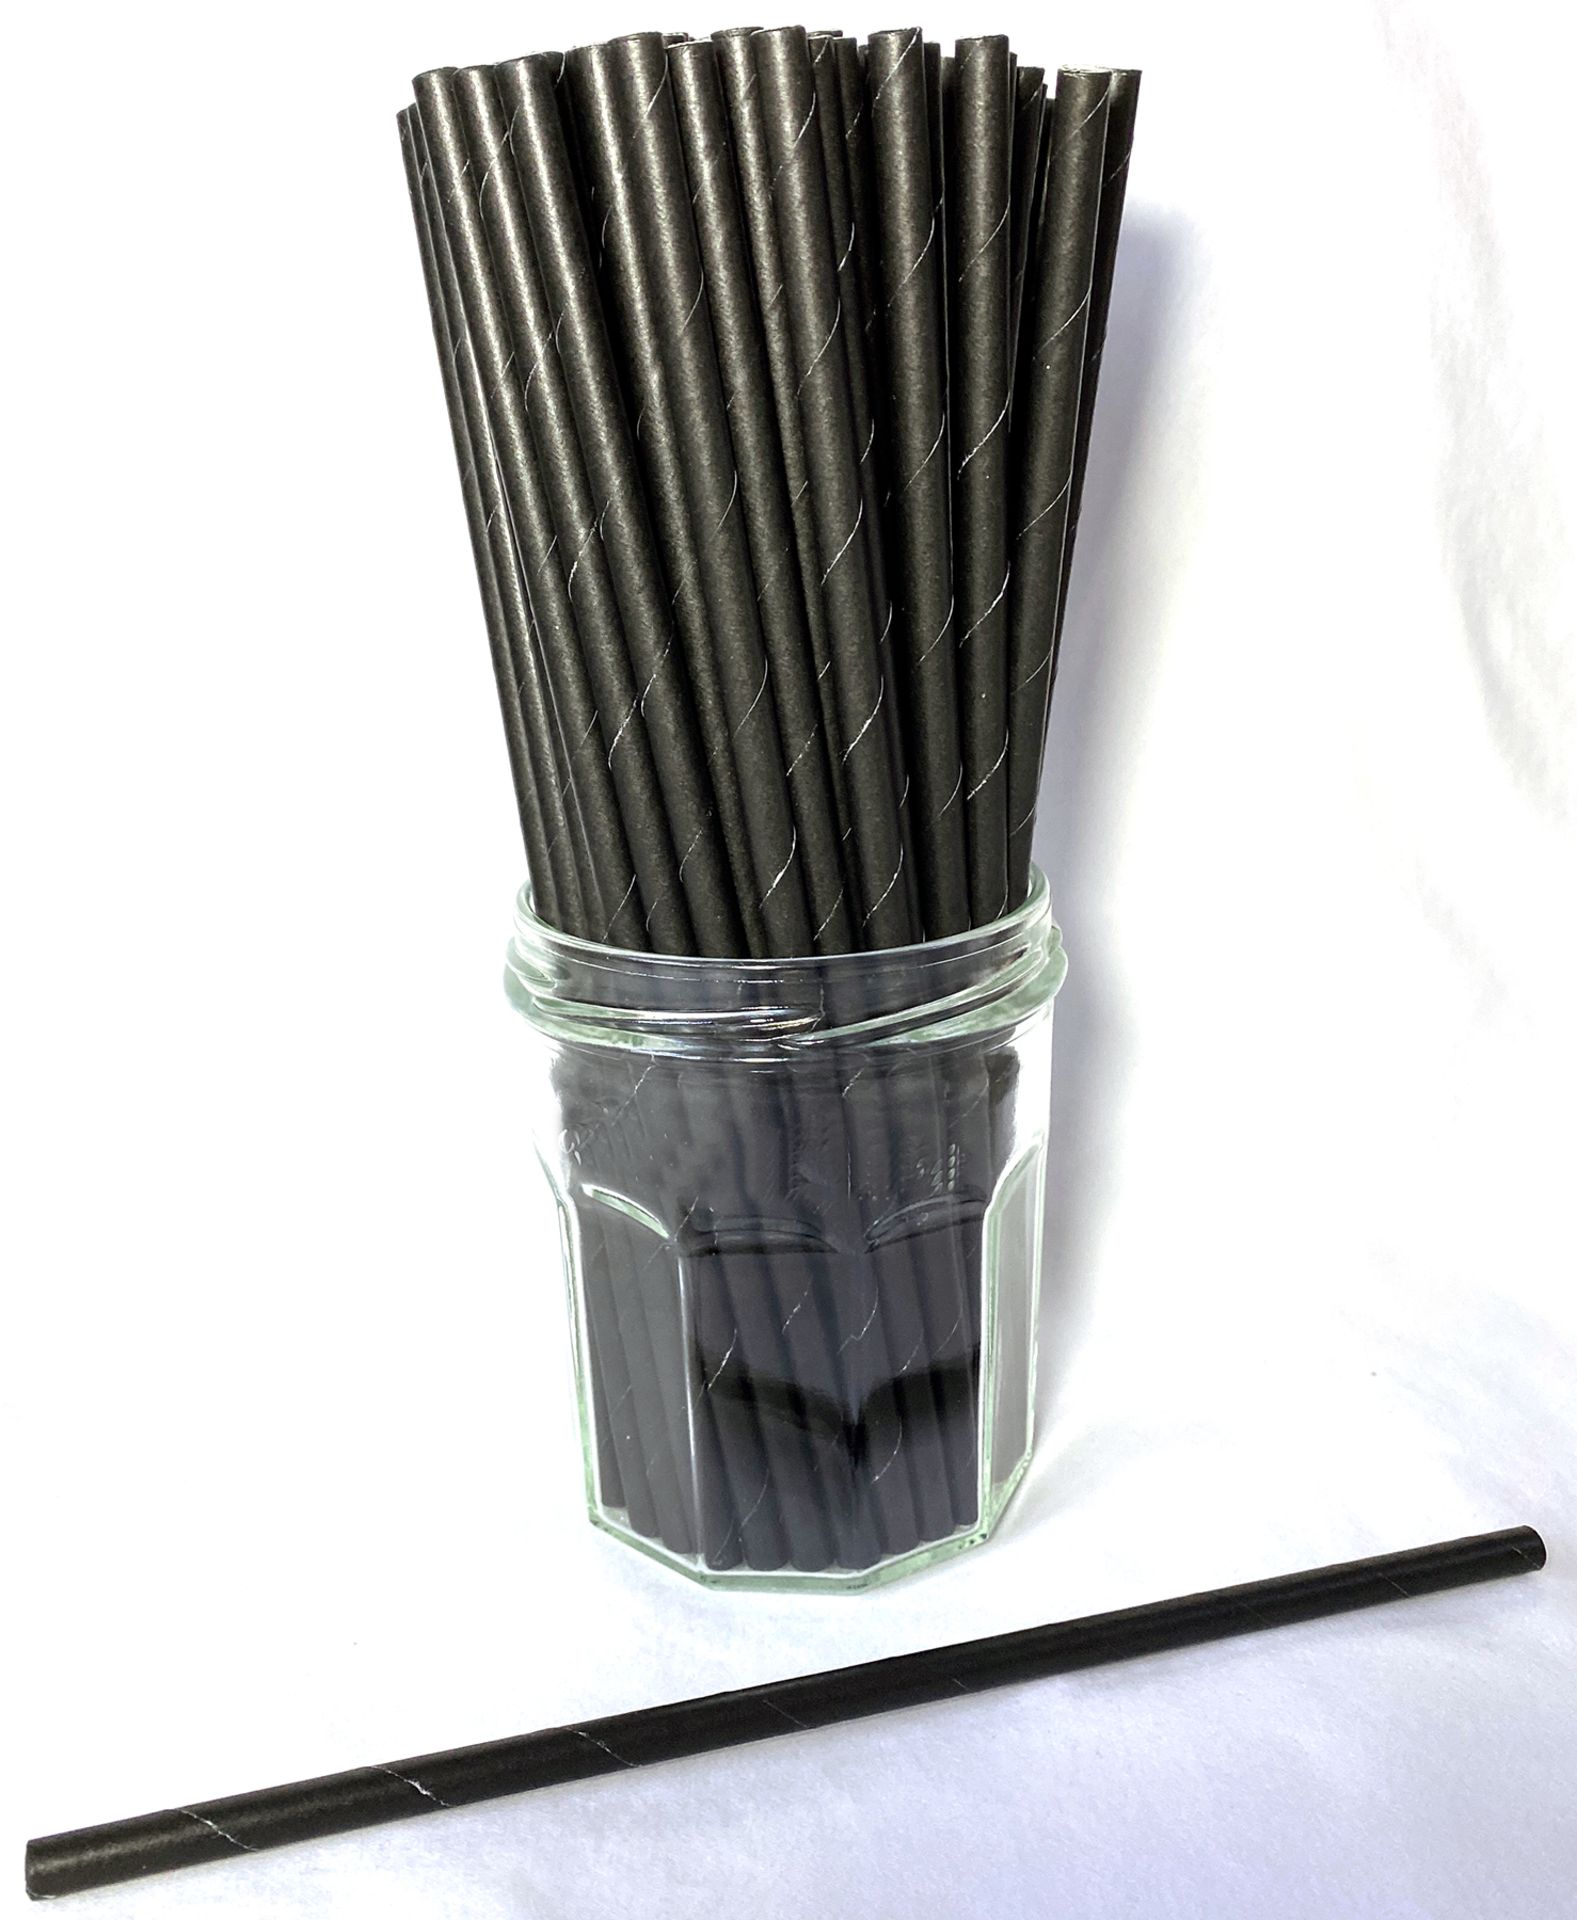 10 x Boxes of Biodegradable Jumbo Straws by 888 Gastro Disposables - Image 2 of 4